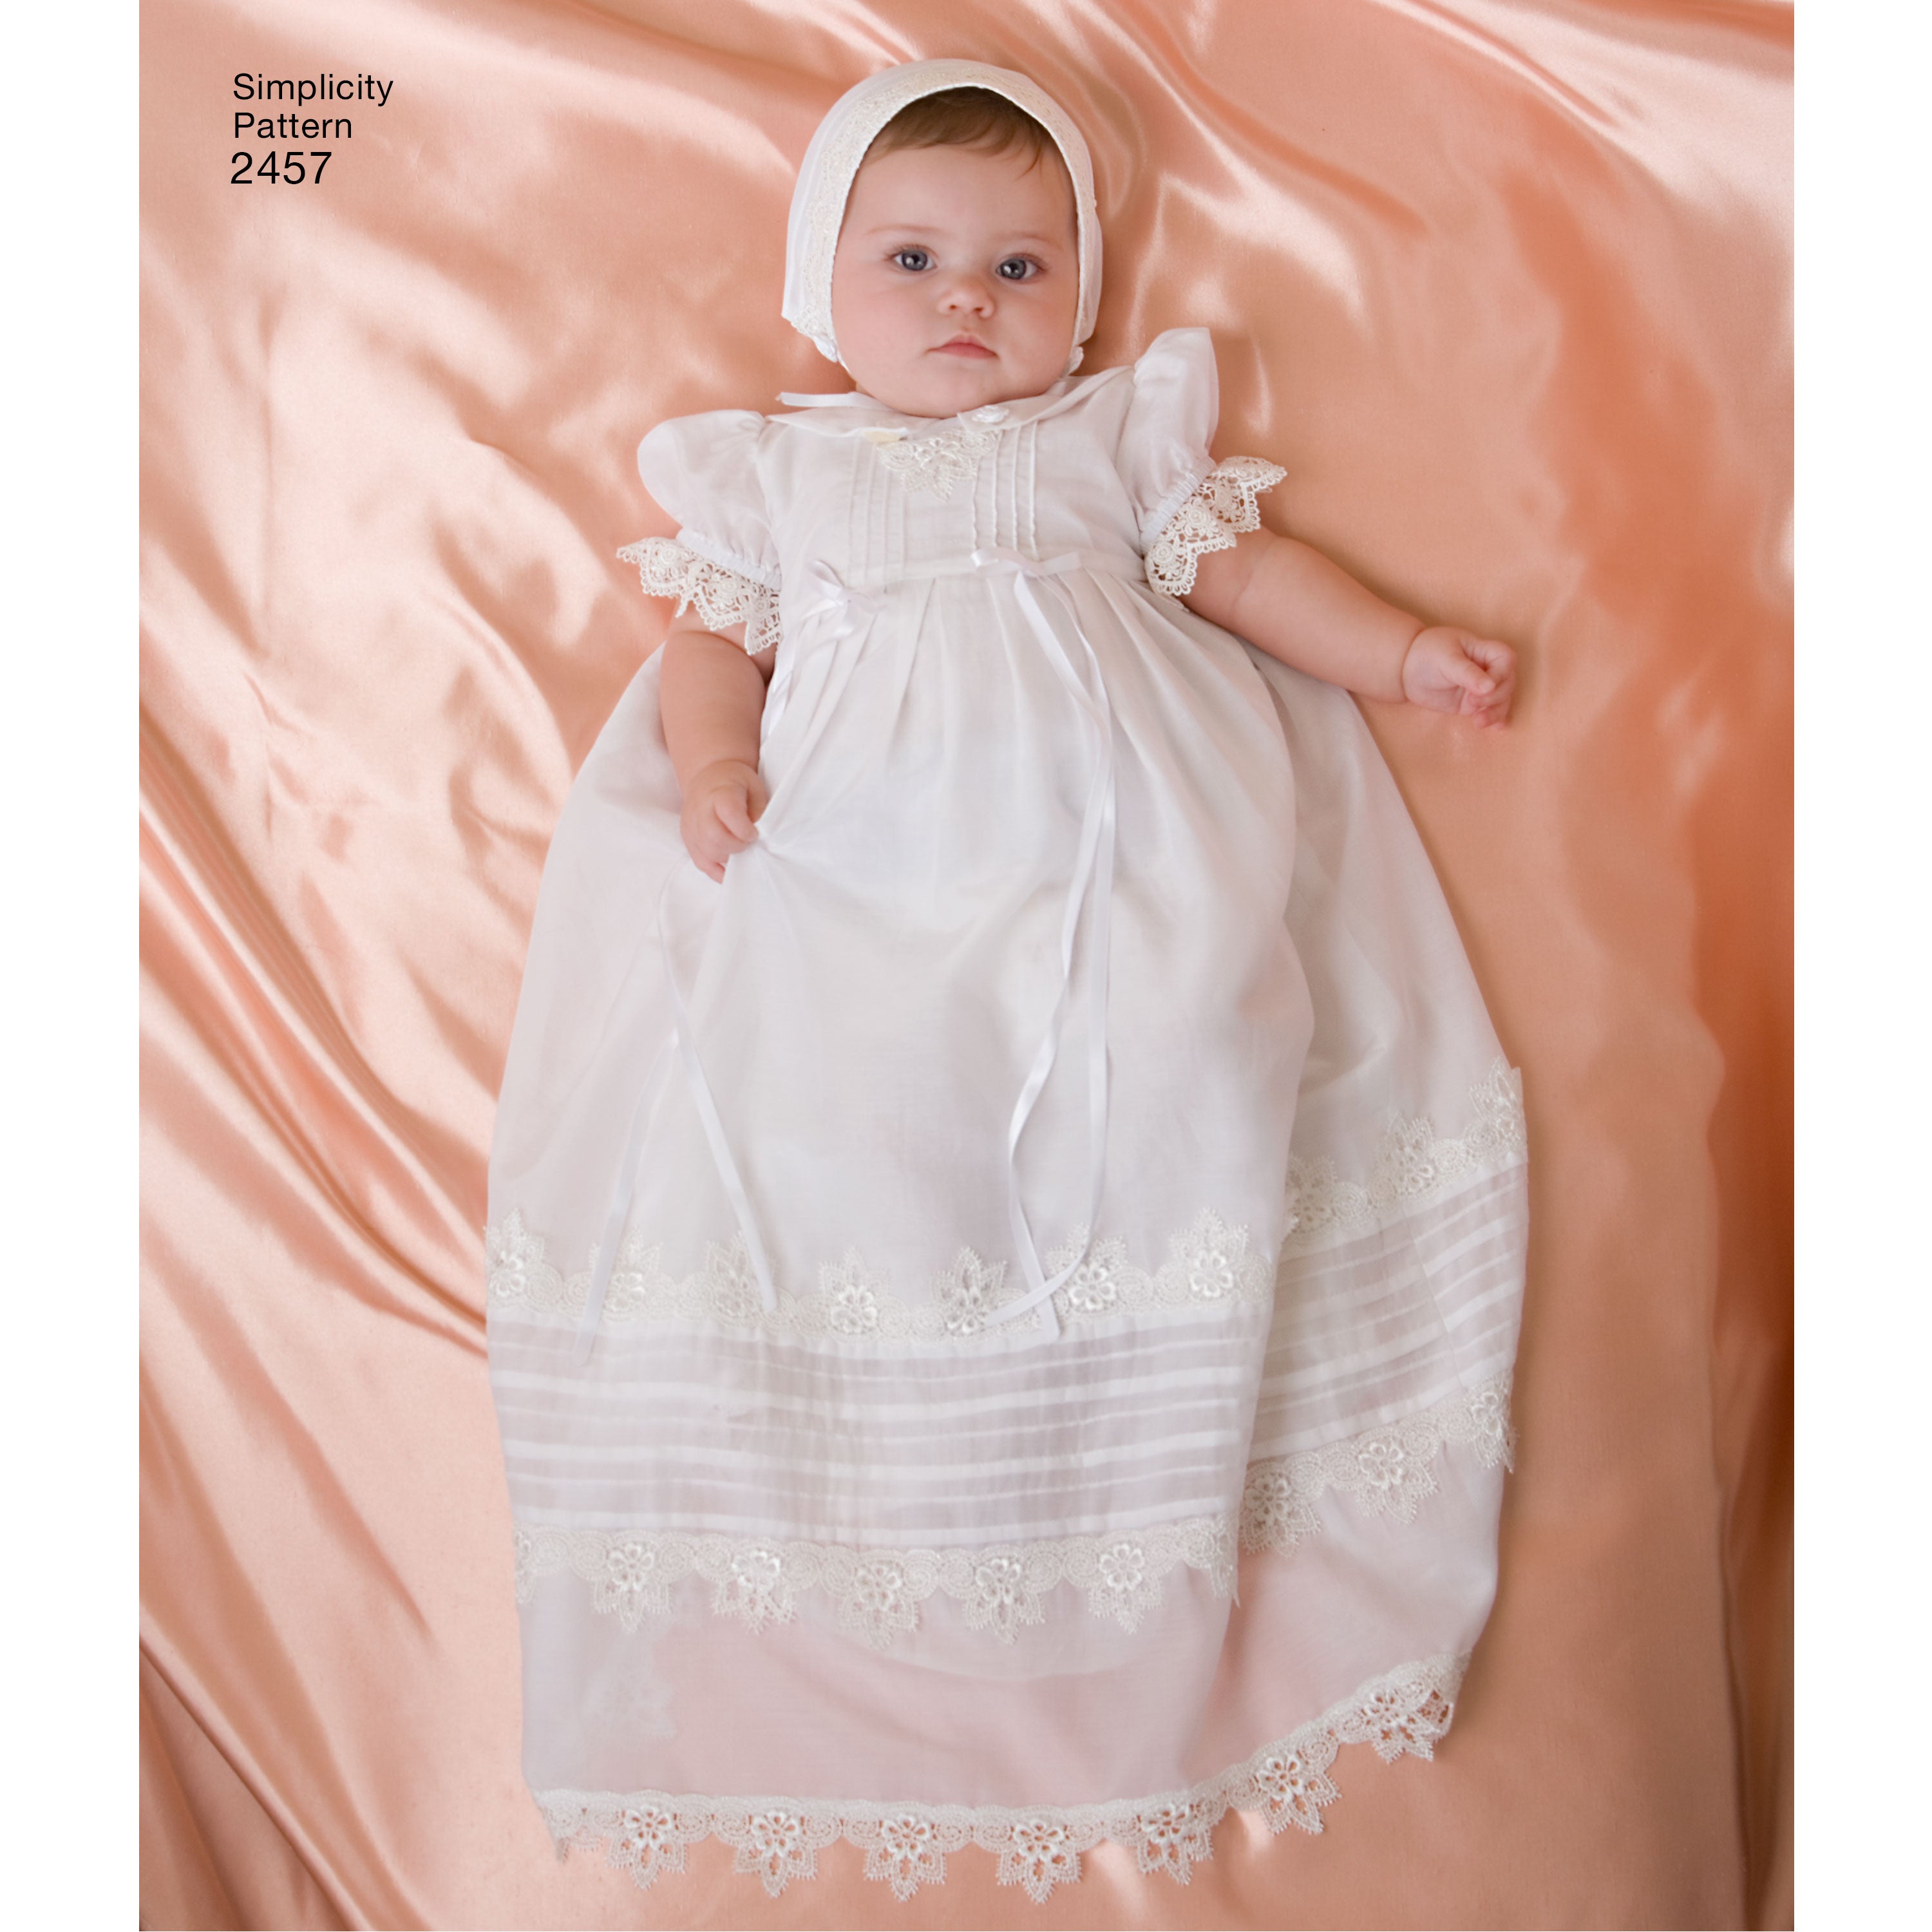 KNOTTED GOWN for BABY Sewing Pattern Pdf/a0 Now Includes 3 Sizes: Preemie,  Newborn, 0-3mos - Etsy